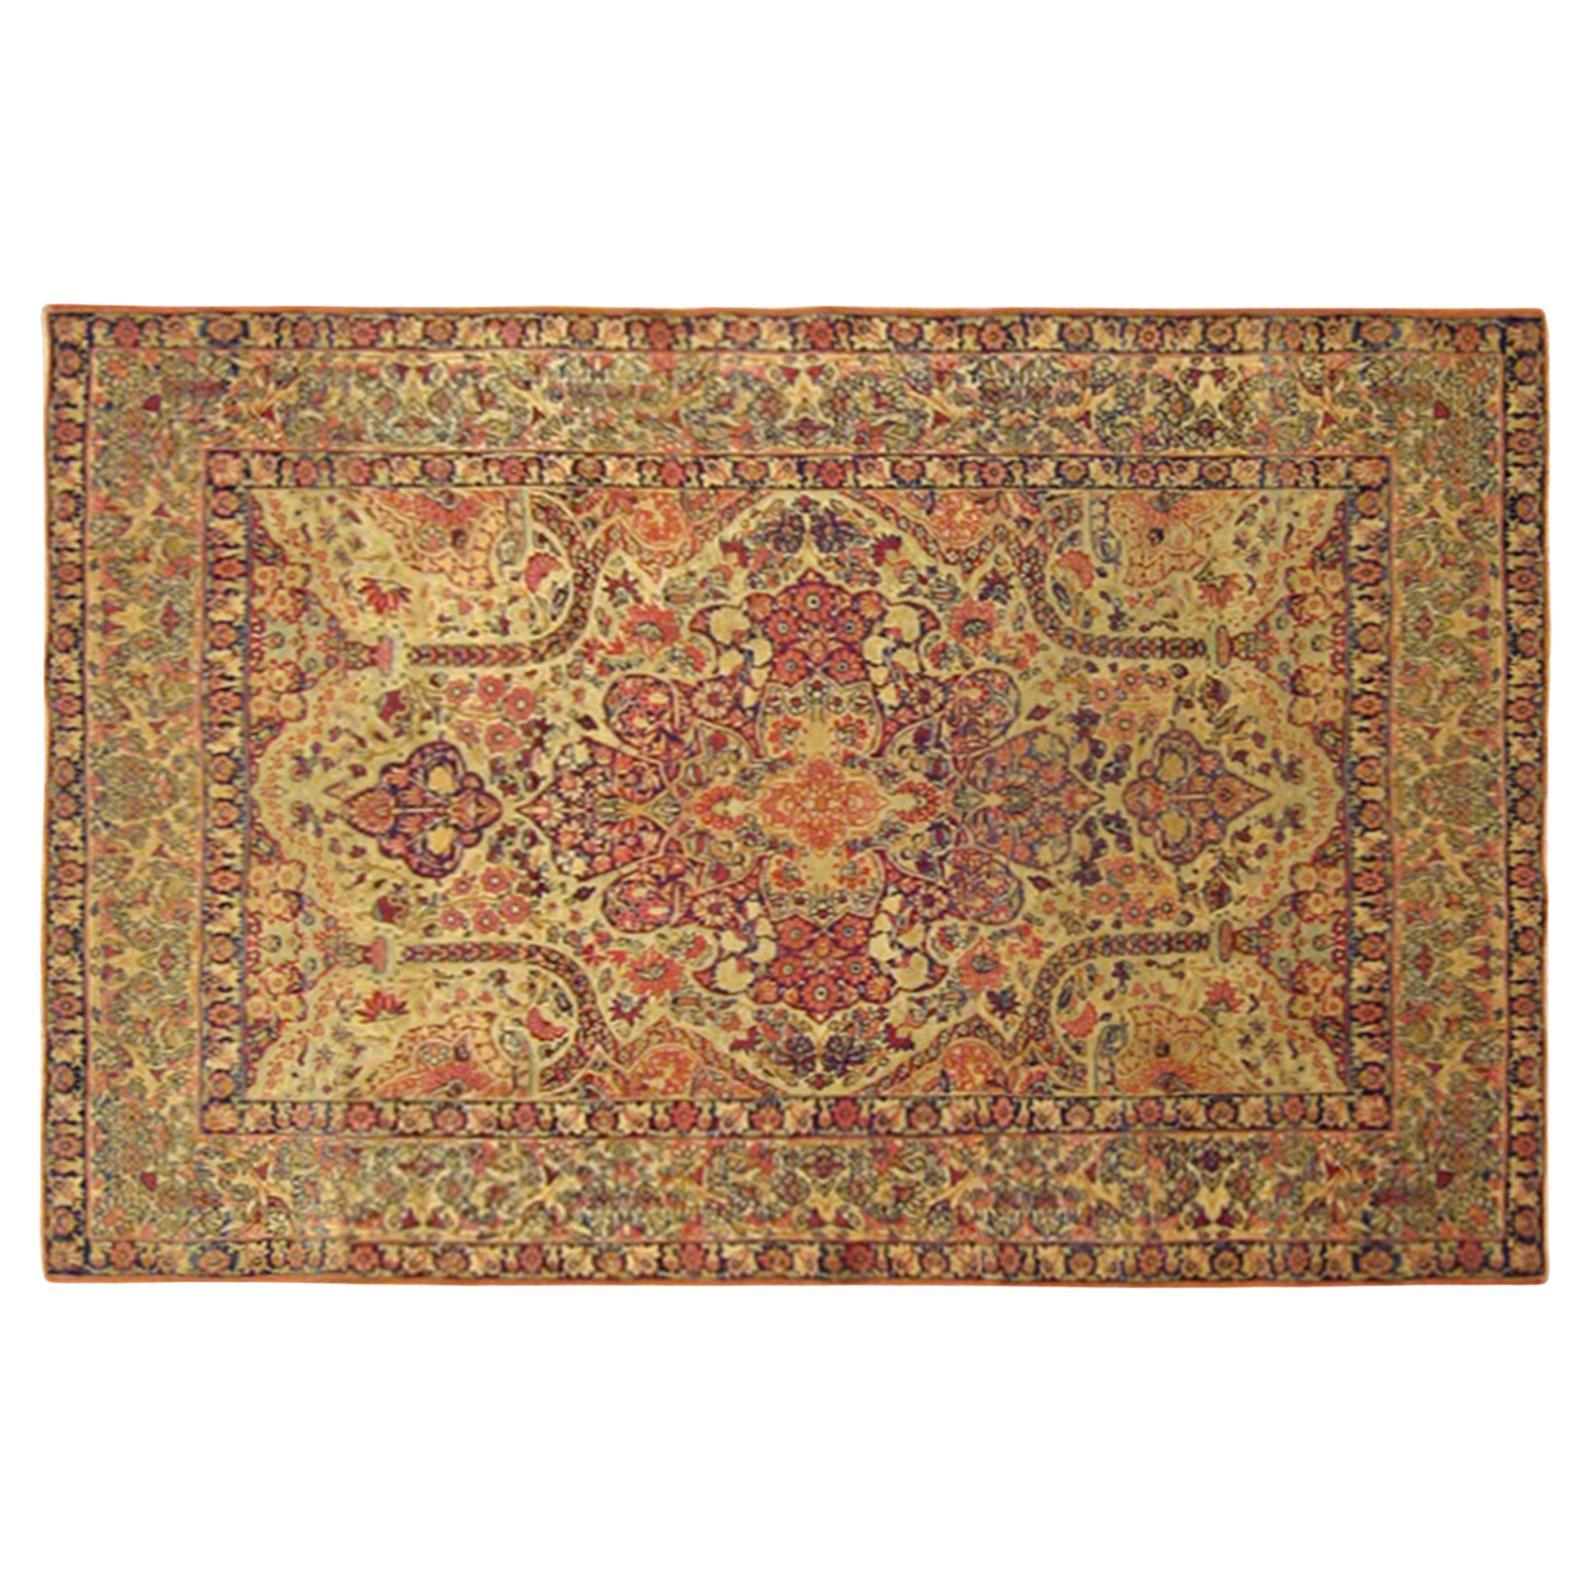 Antique Persian Lavar Oriental Carpet, in Small Size, with a Central Medallion